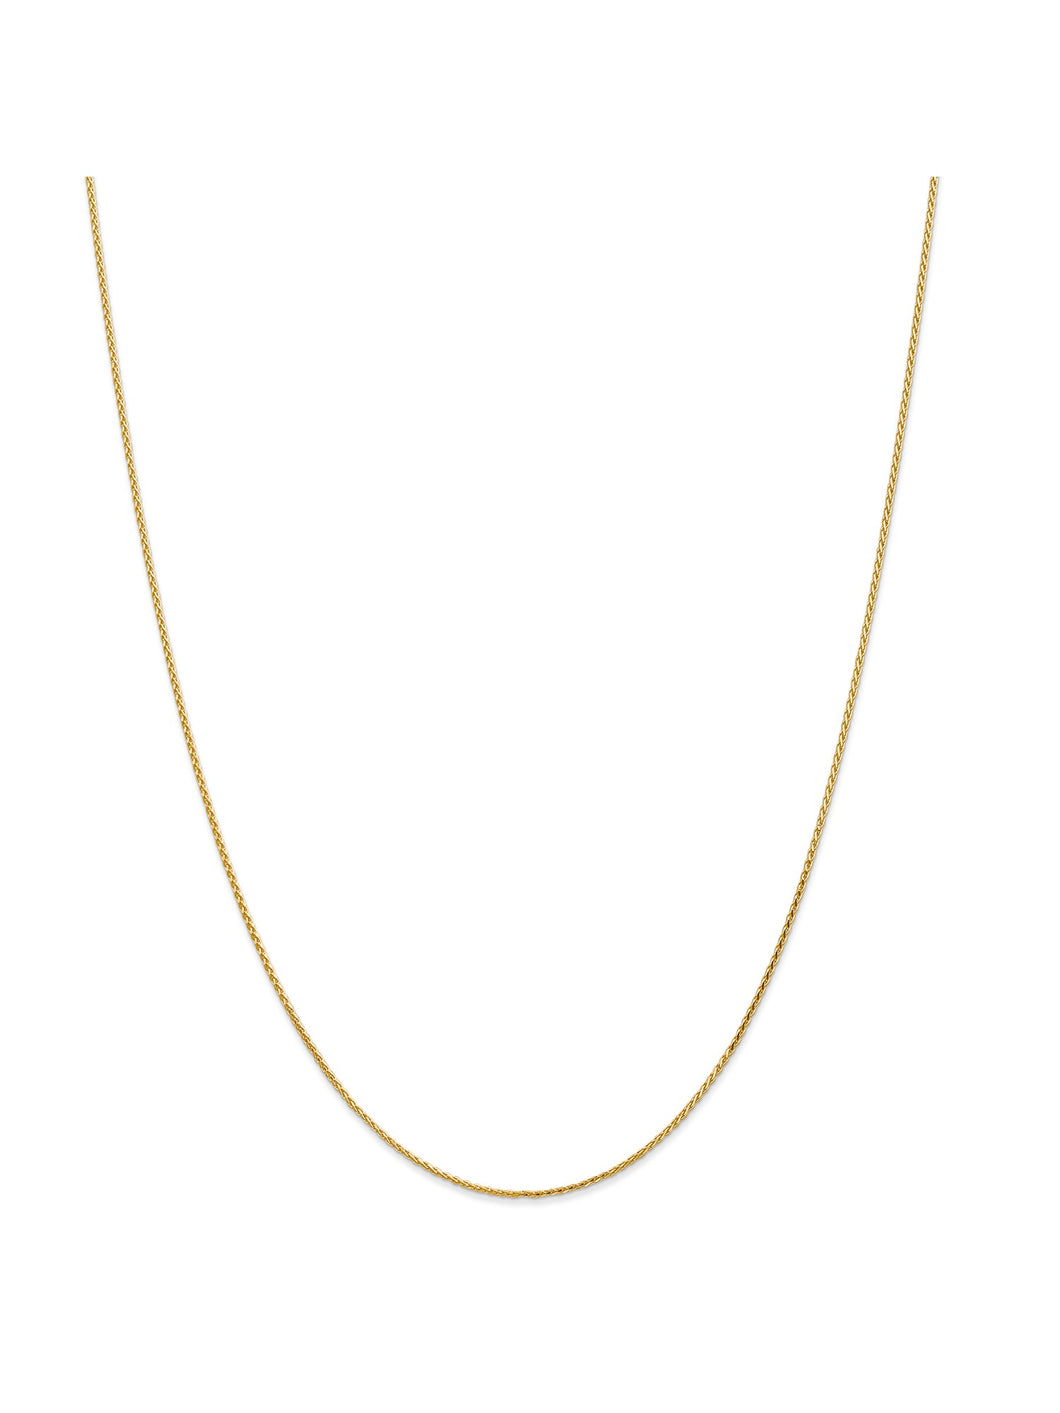 14k Yellow Gold 1mm Wheat Chain Necklace